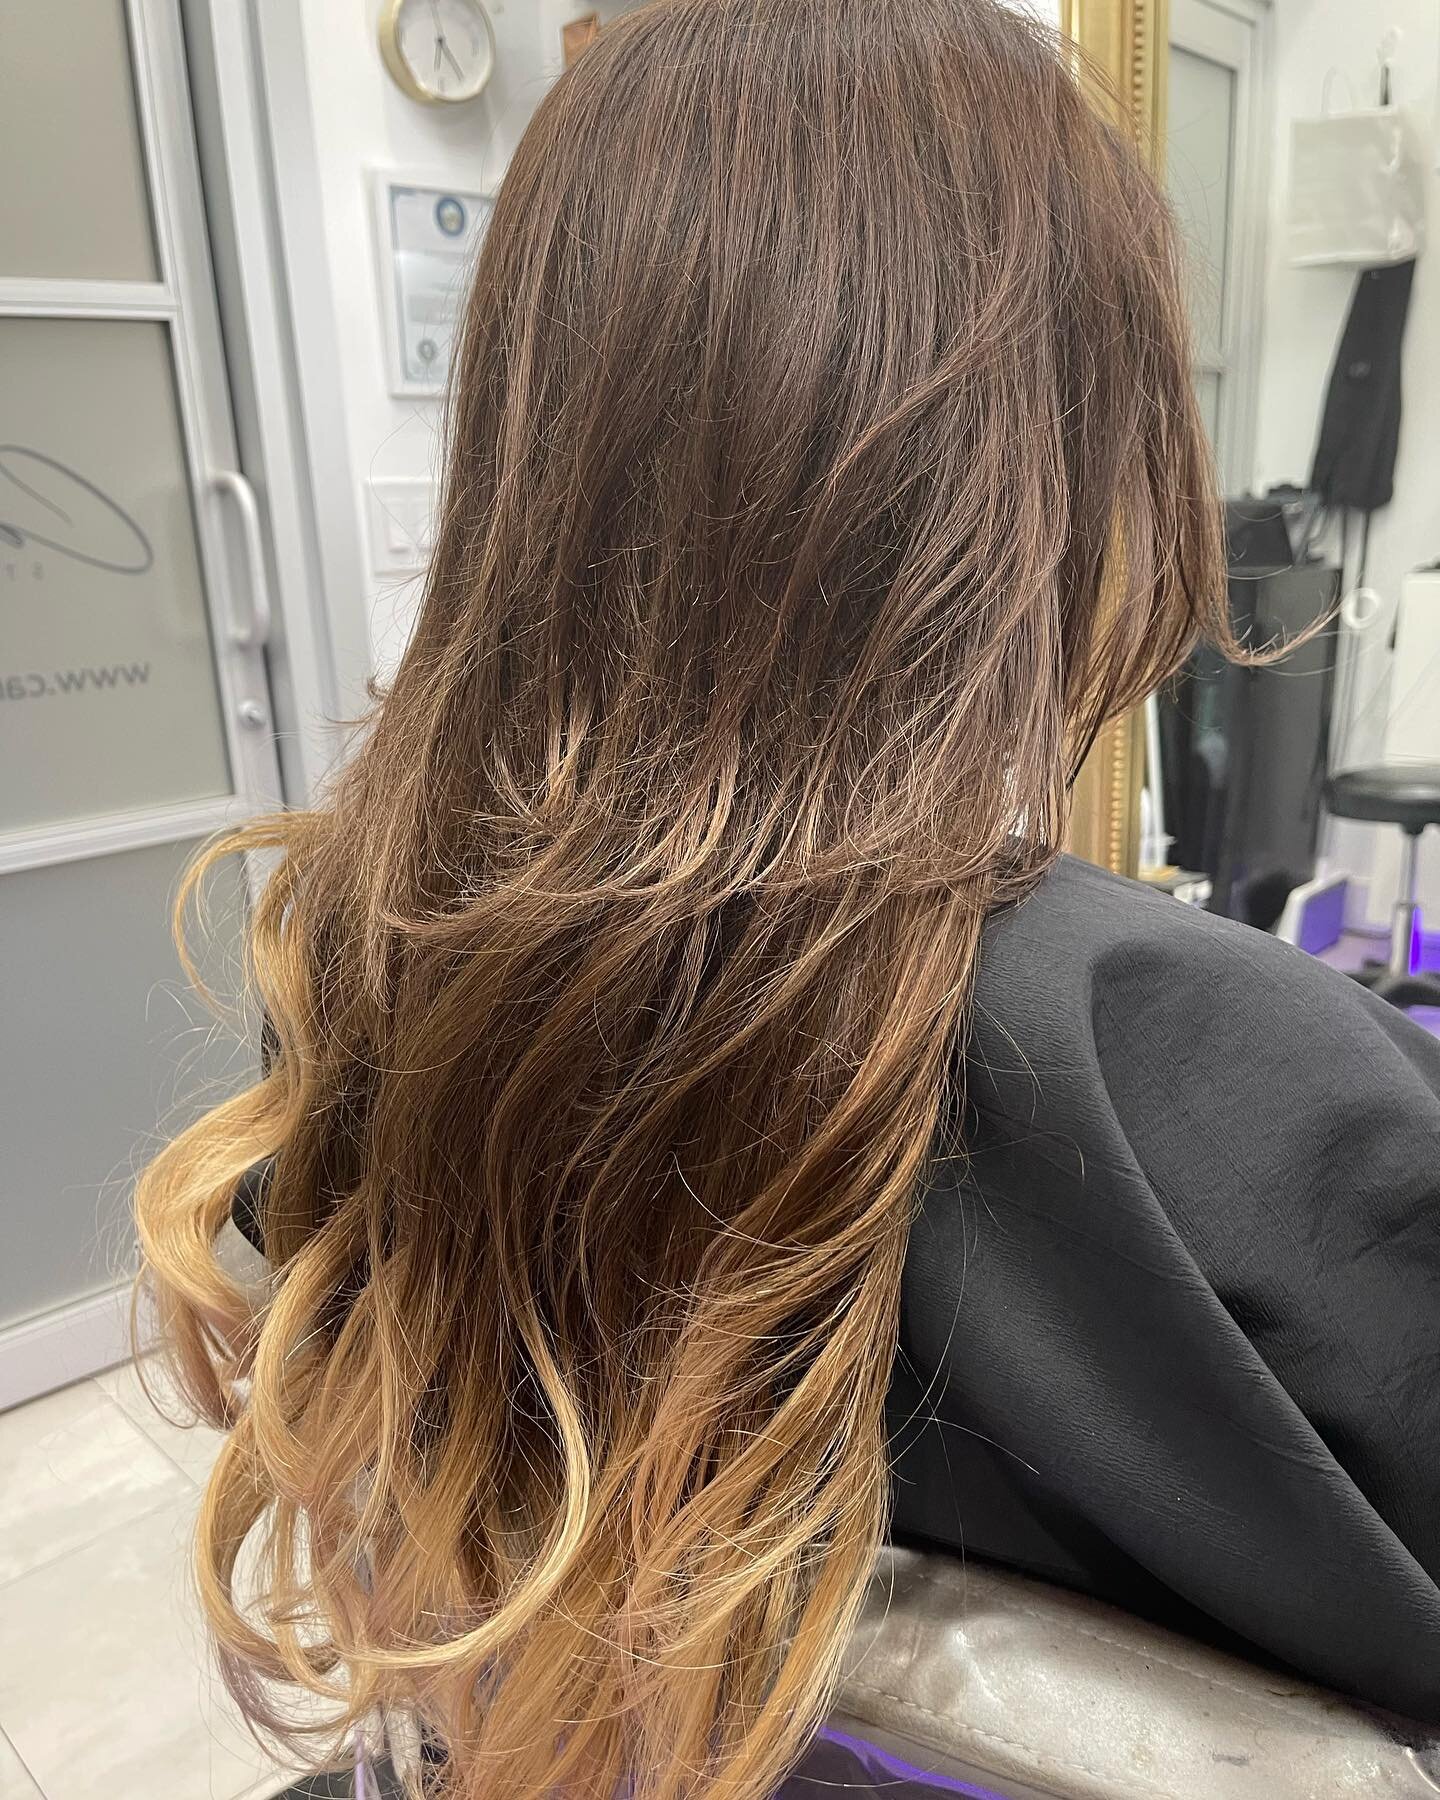 Once again for instant change we go to @bellamihair tape in wavy extensions.. with blond tips after complete color match and a @brazilianblowout to smooth out her hair and control that frizz.. Swipe left to see what I was working with &hellip;.